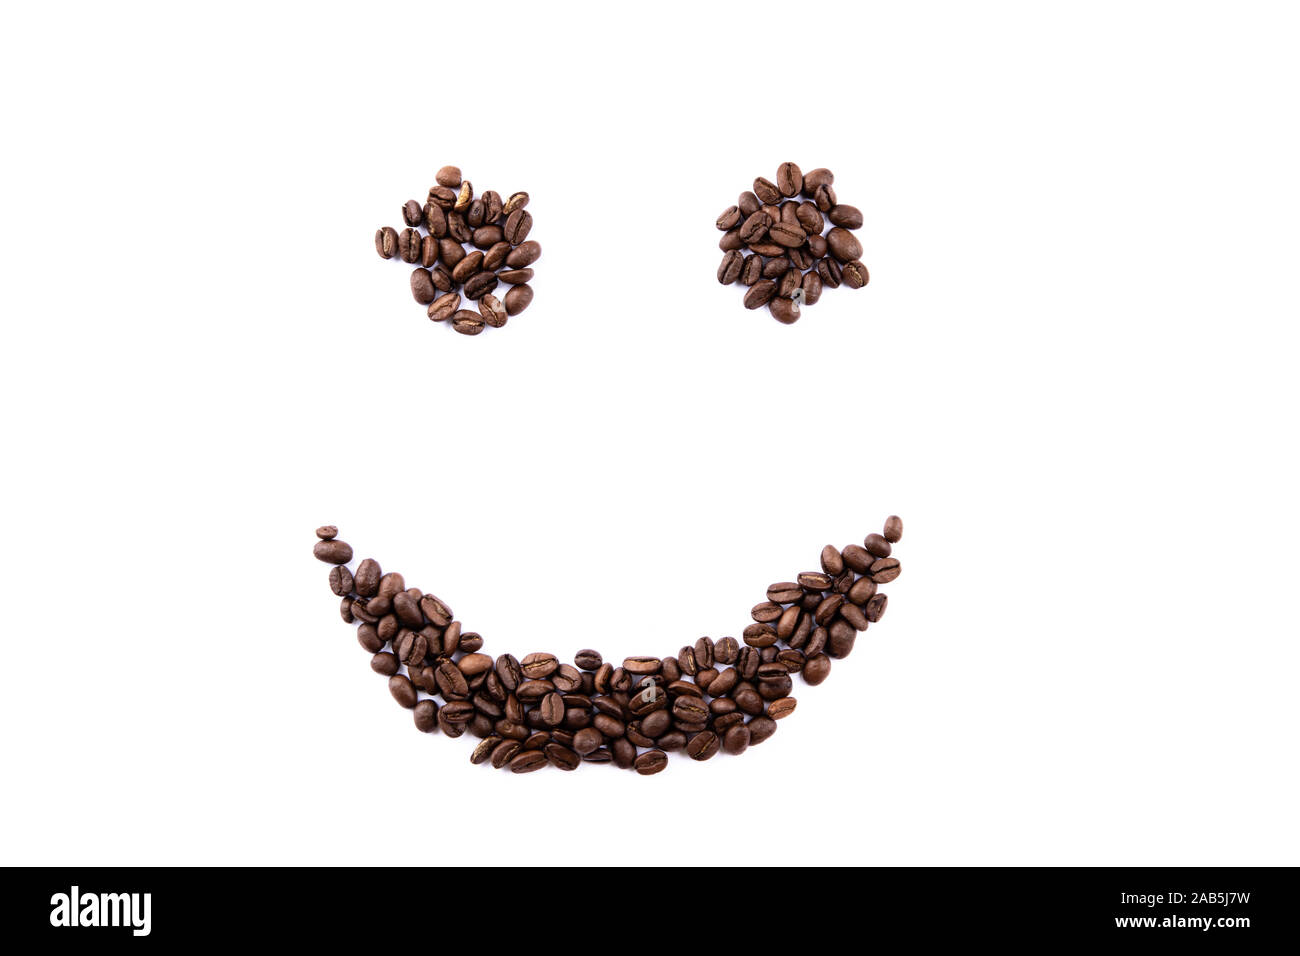 Smiley face made of coffee beans on white backgroud with copyspace Stock Photo